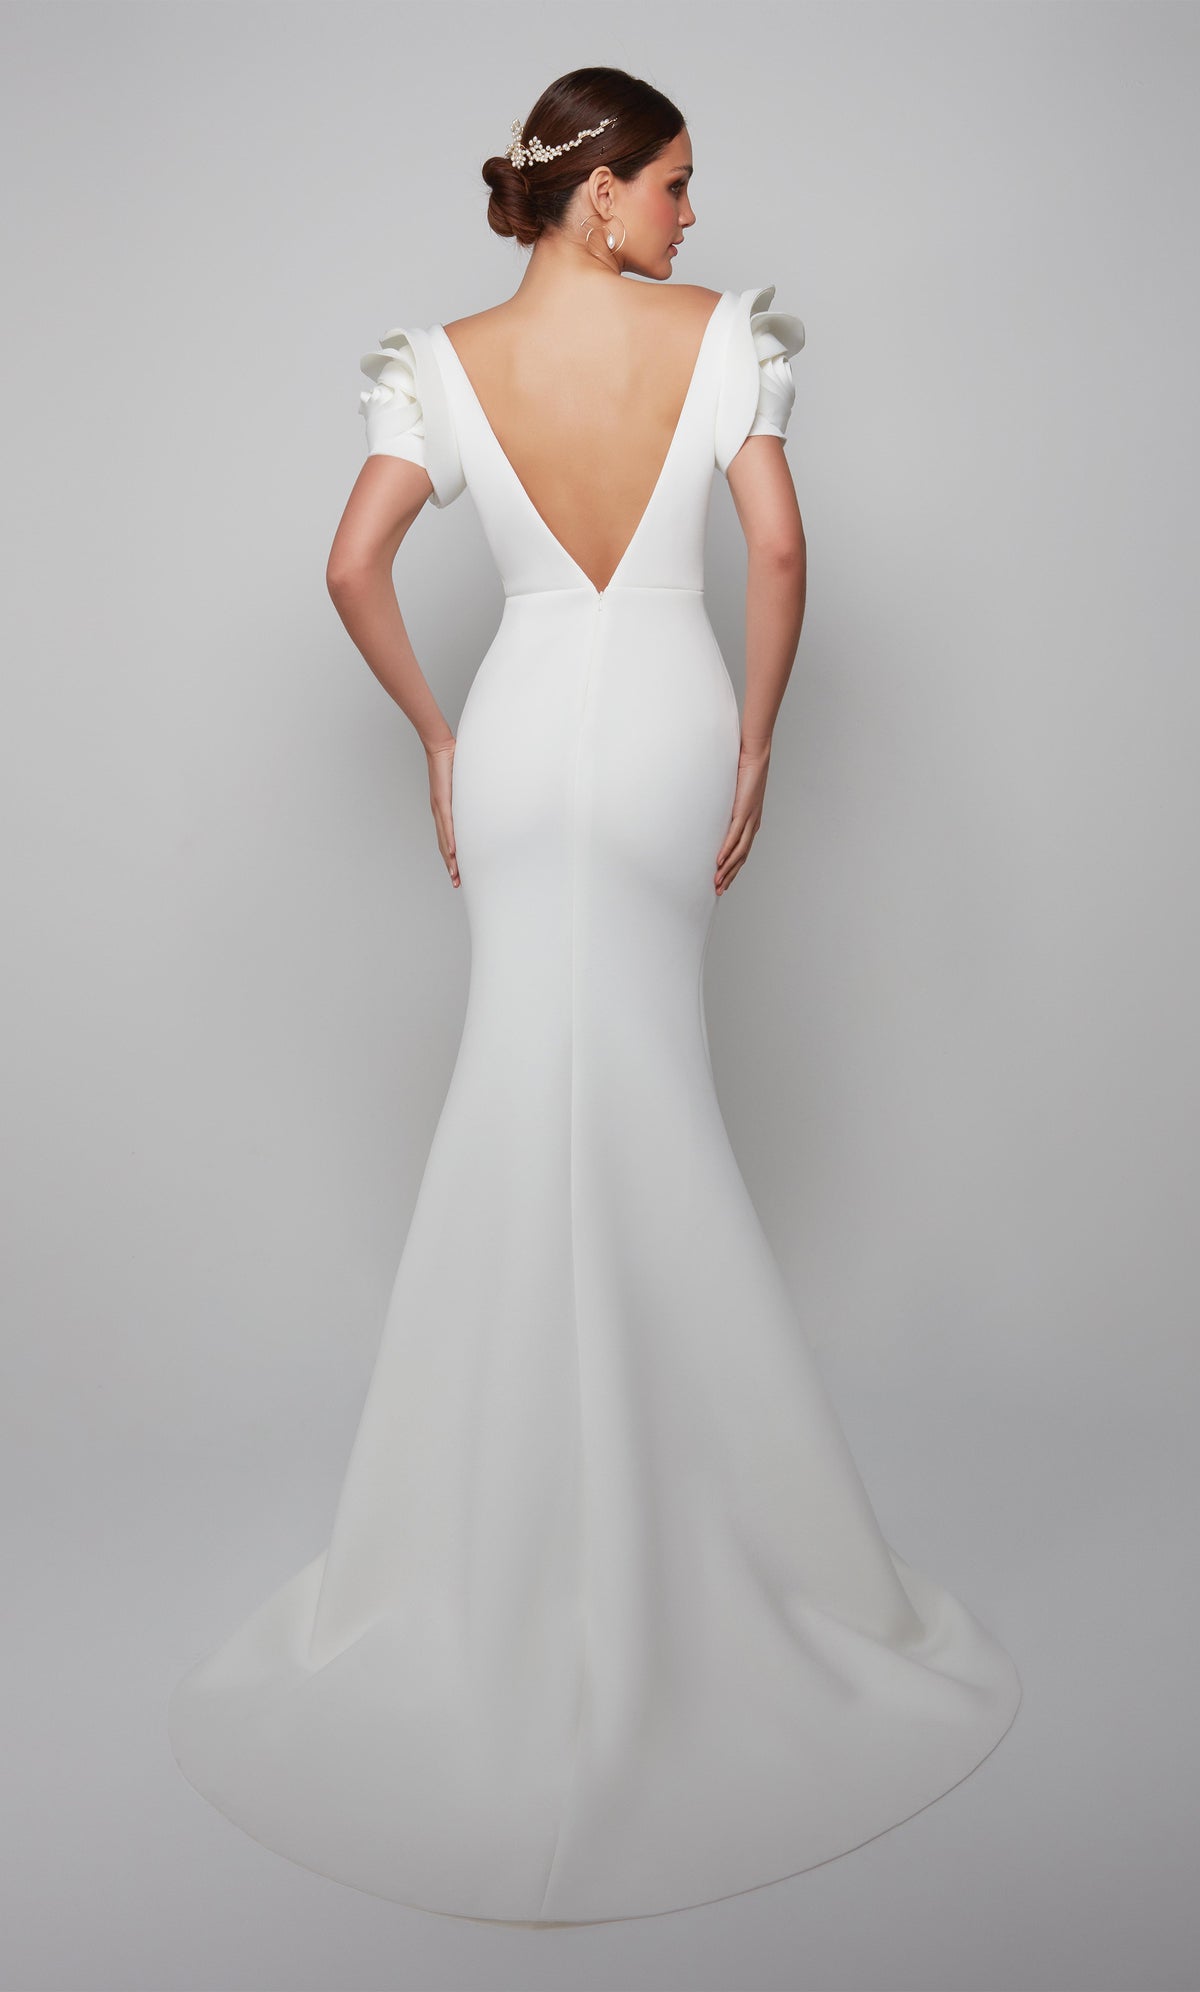 Deep V back wedding dress with rose shaped sleeves and train in ivory.